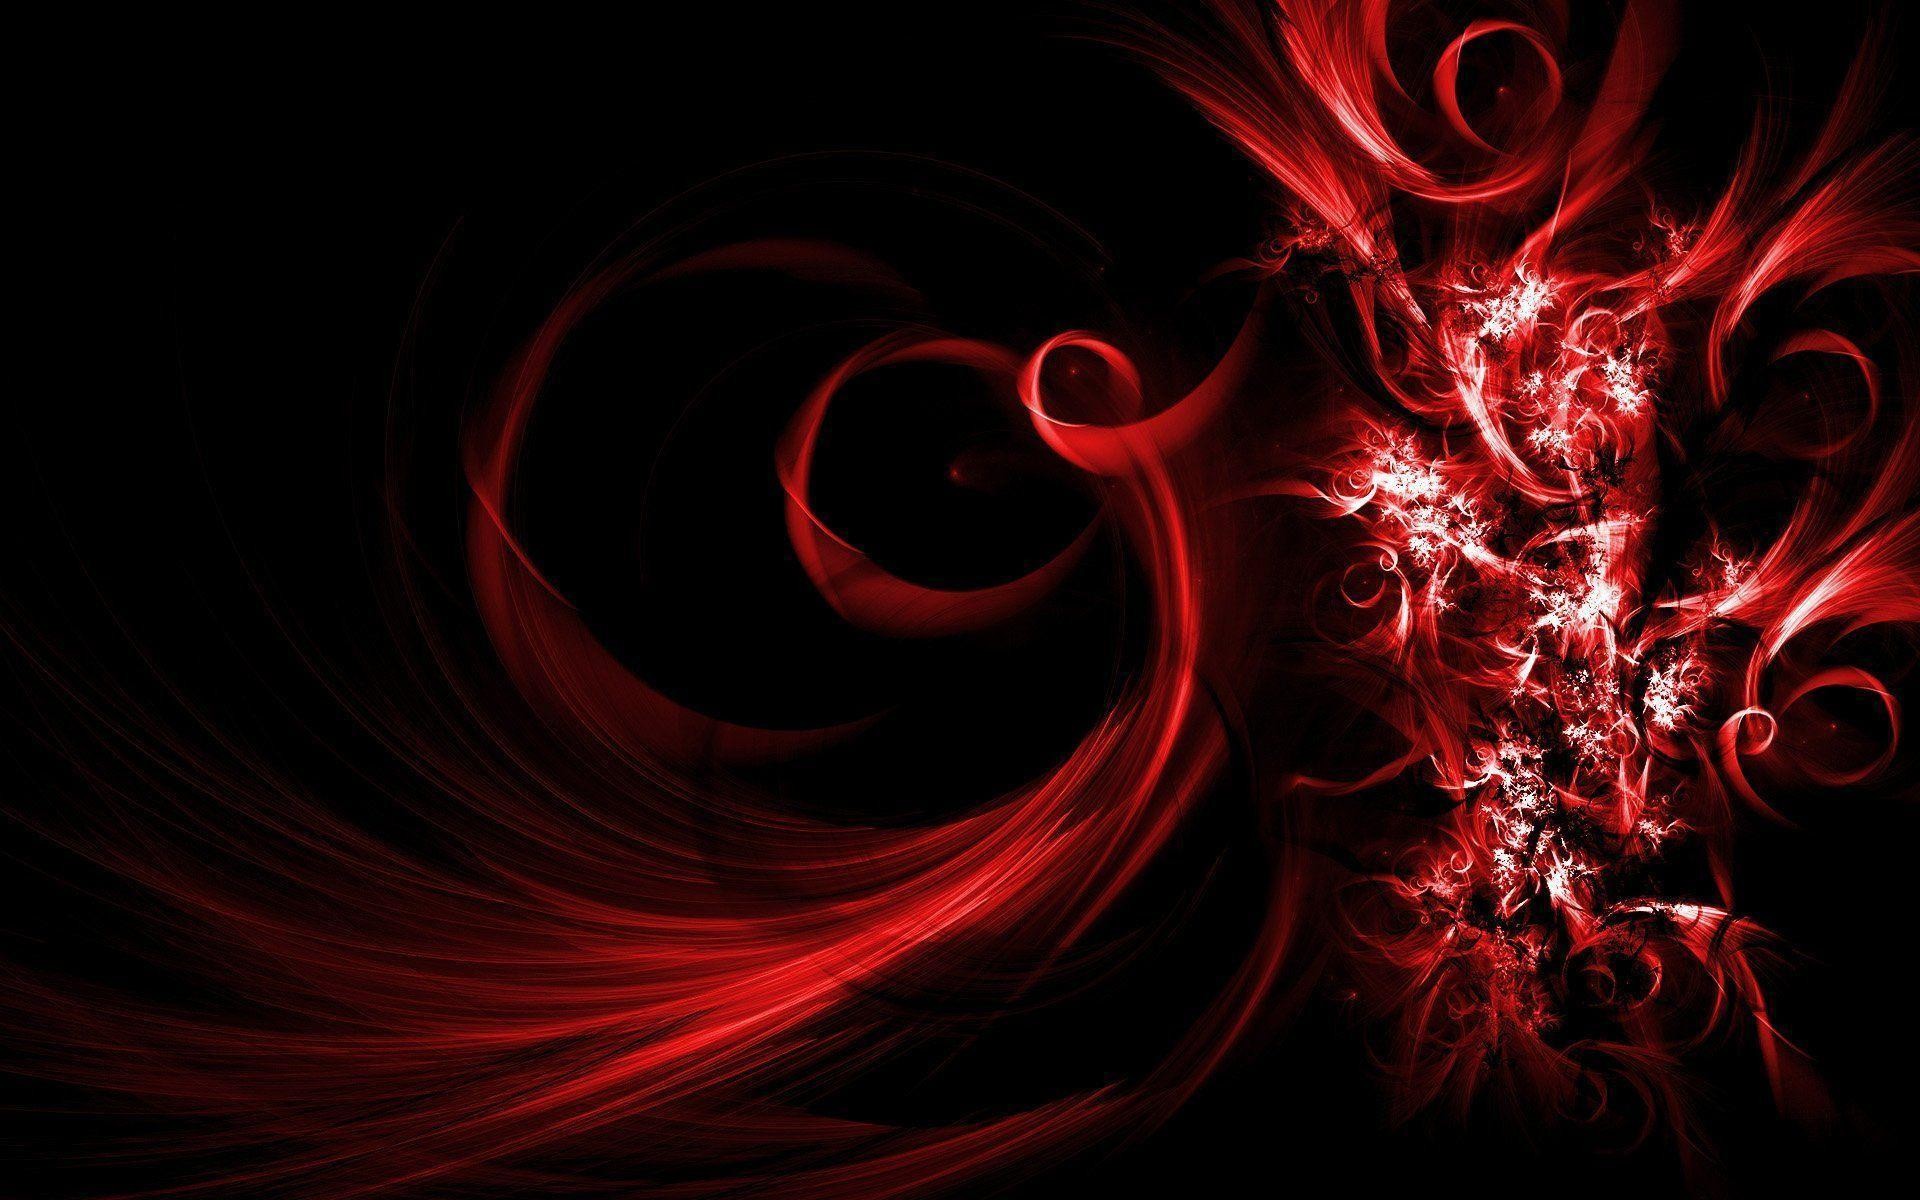 1920x1200 Black And Red Abstract Wallpaper Hd 1080P 12 HD Wallpapers | isghd.com